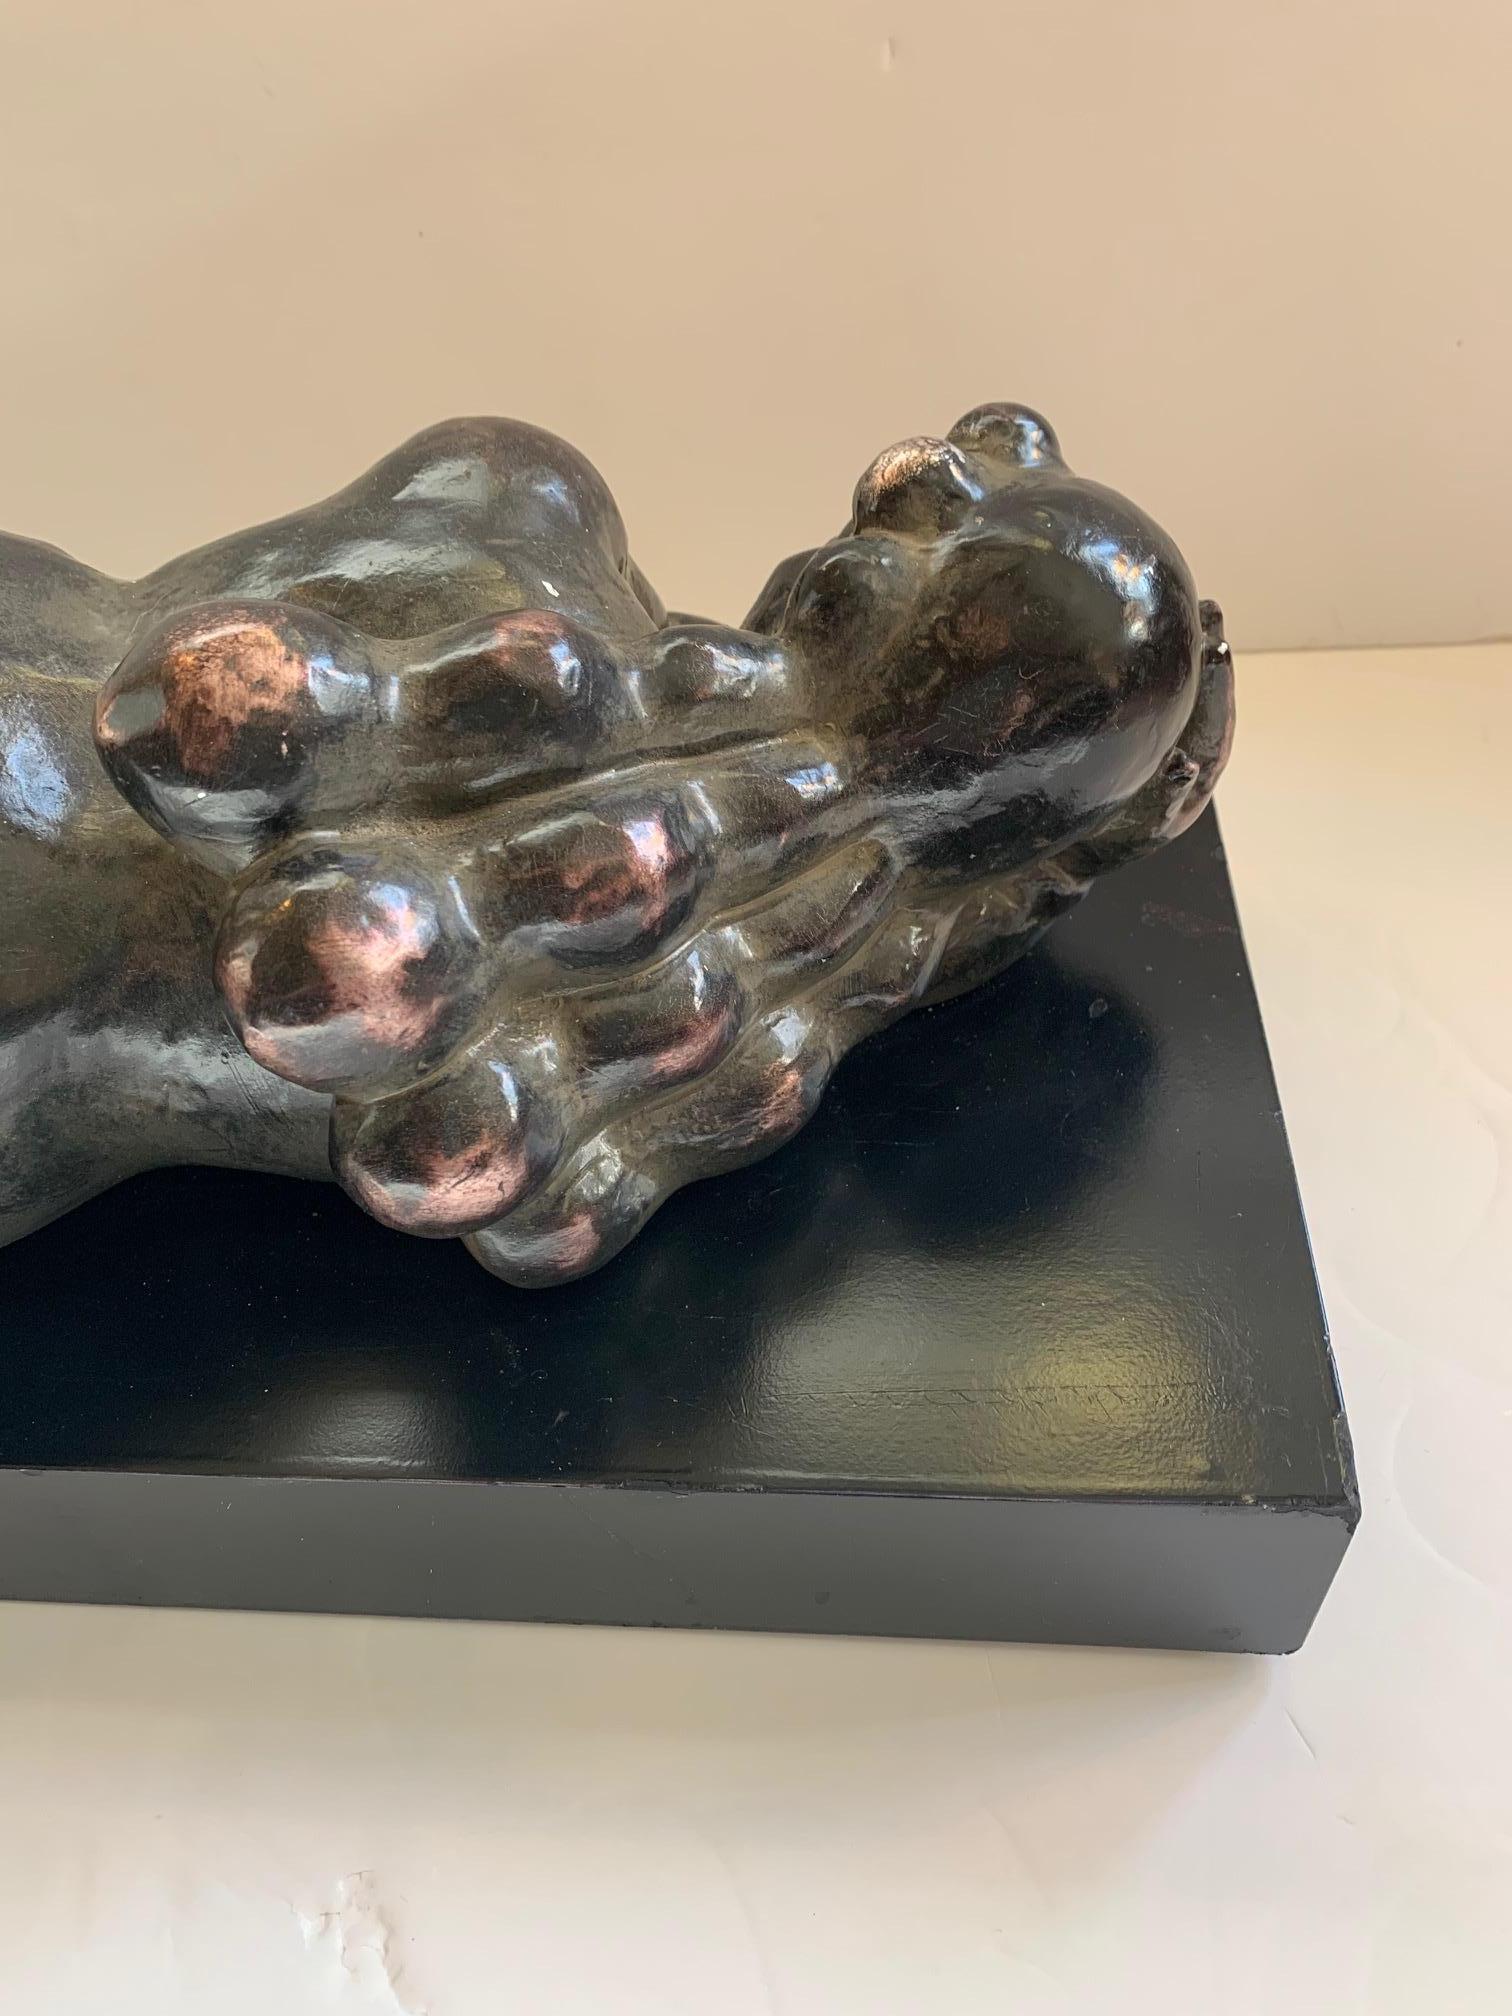 Sensual Reclining Nude Tabletop Sculpture in Style of Botero 2